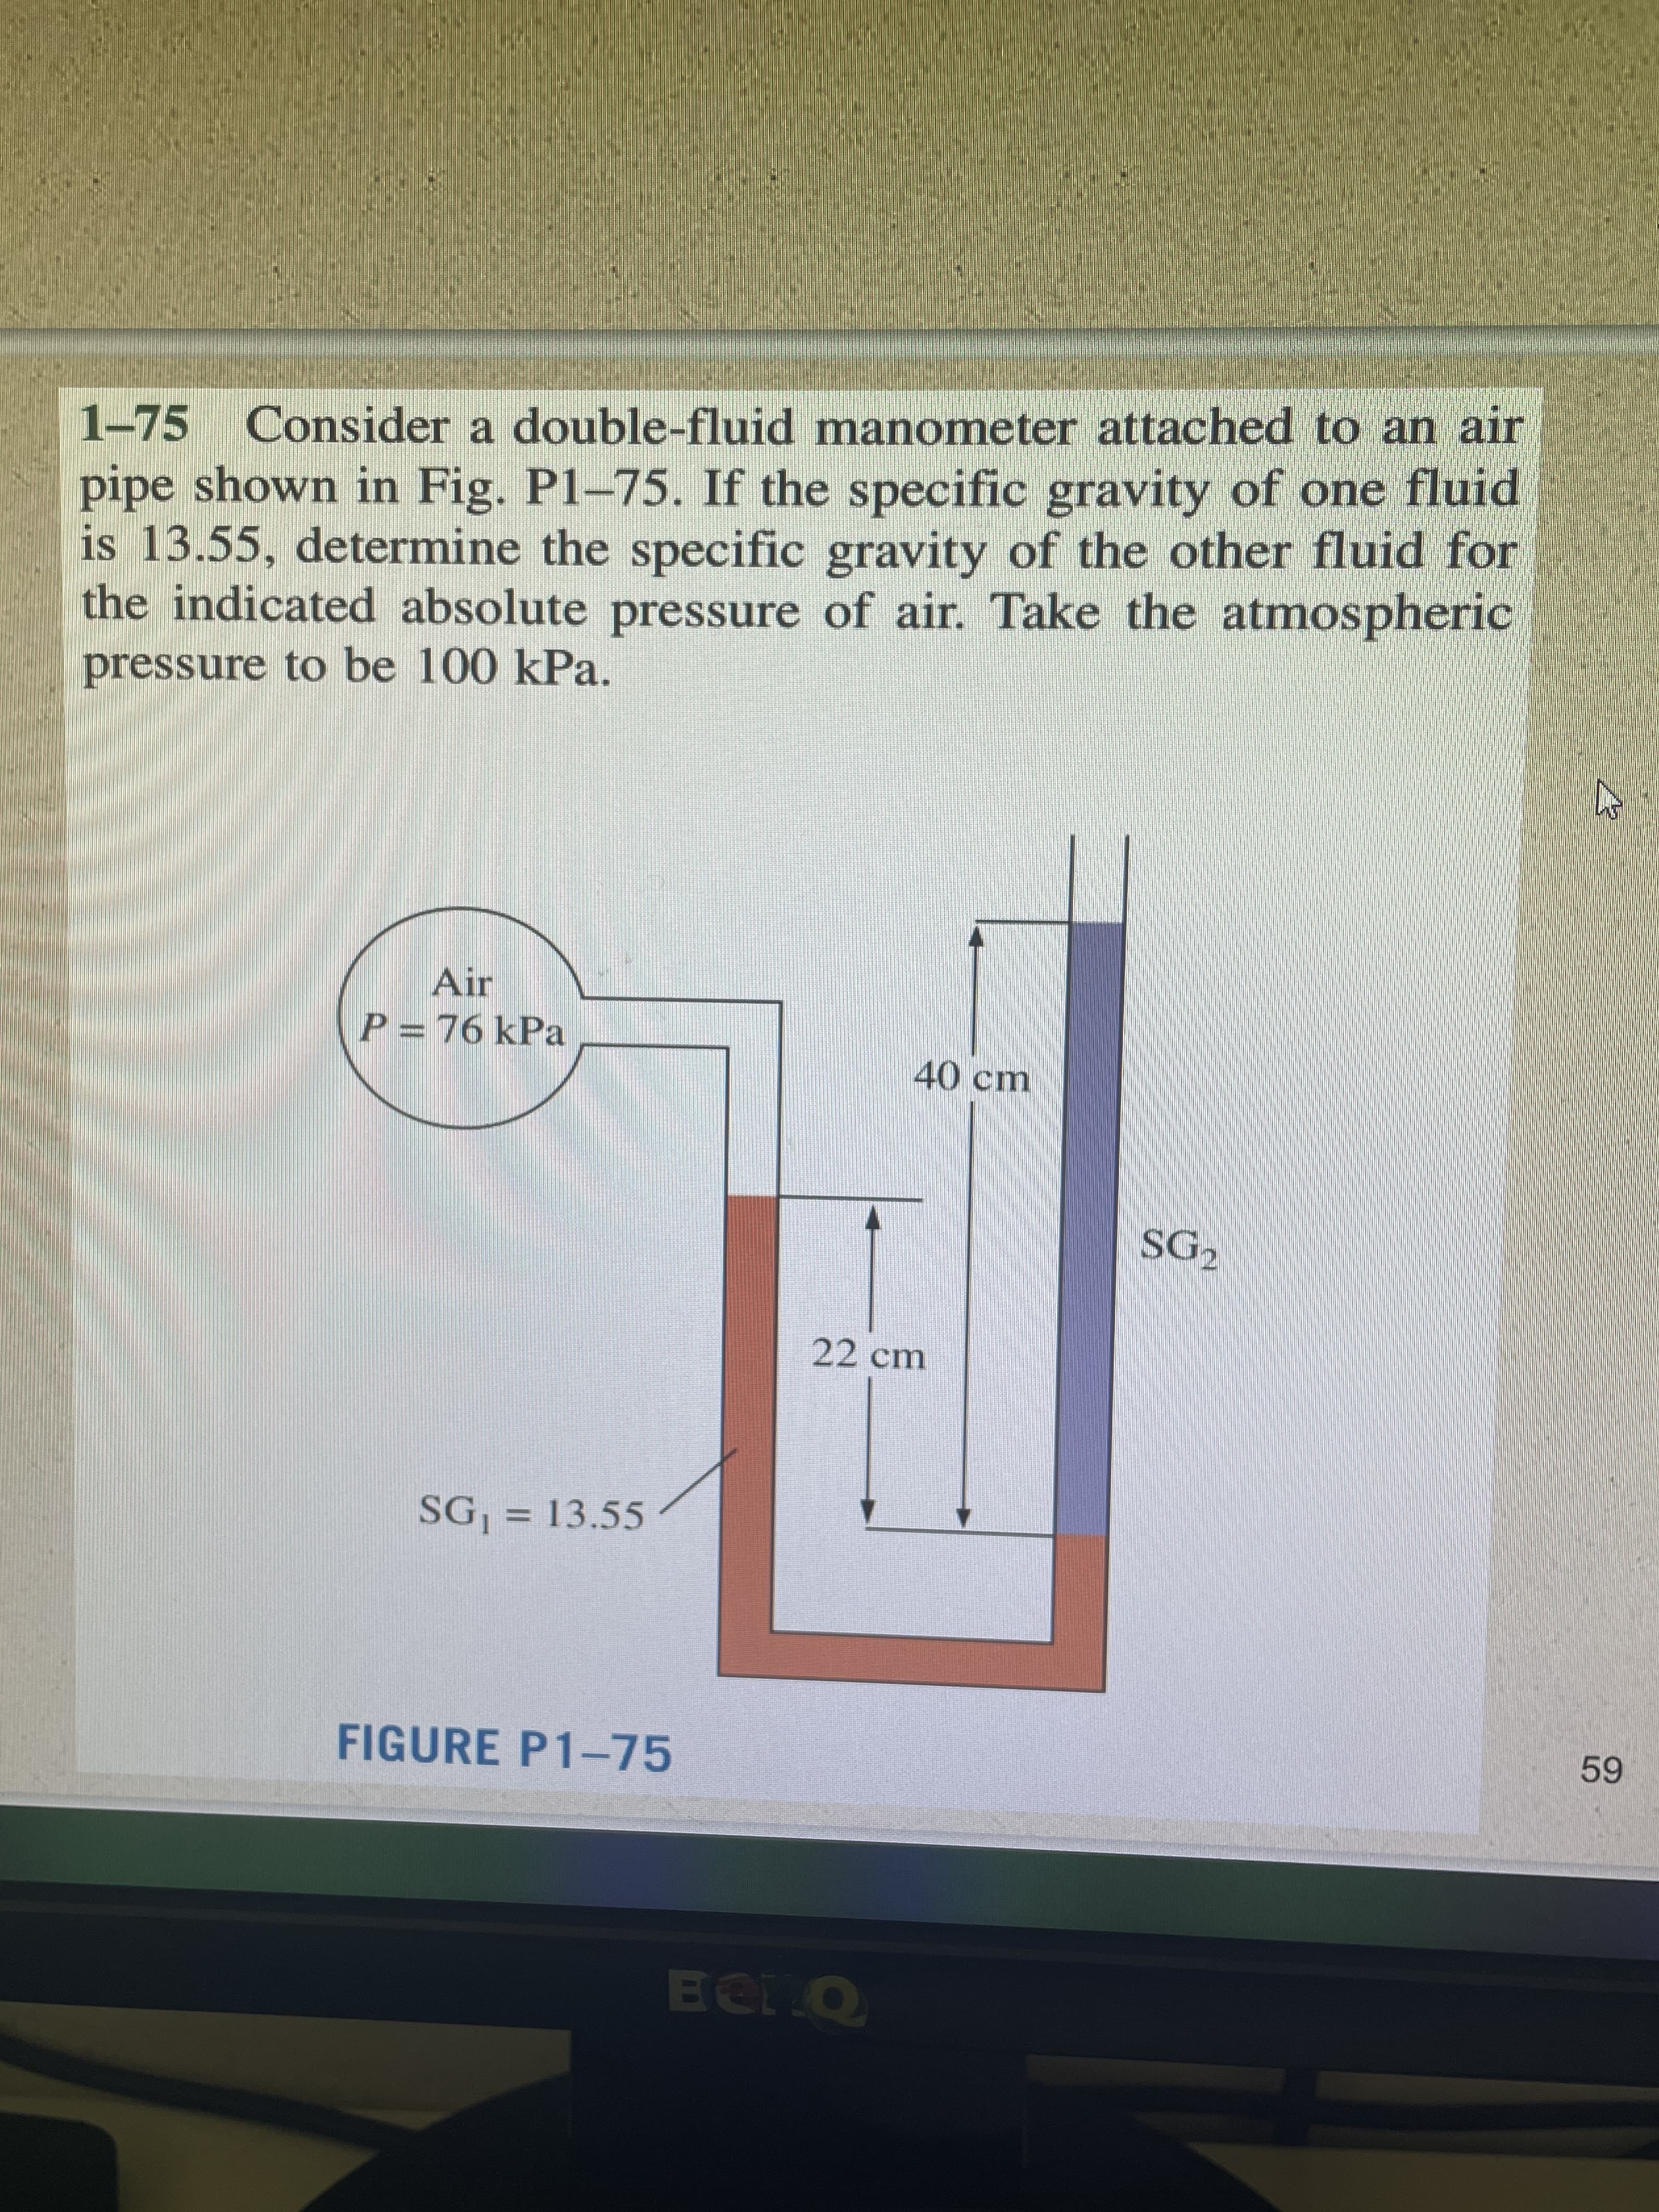 1-75 Consider a double-fluid manometer attached to an air
pipe shown in Fig. P1-75. If the specific gravity of one fluid
is 13.55, determine the specific gravity of the other fluid for
the indicated absolute pressure of air. Take the atmospheric
